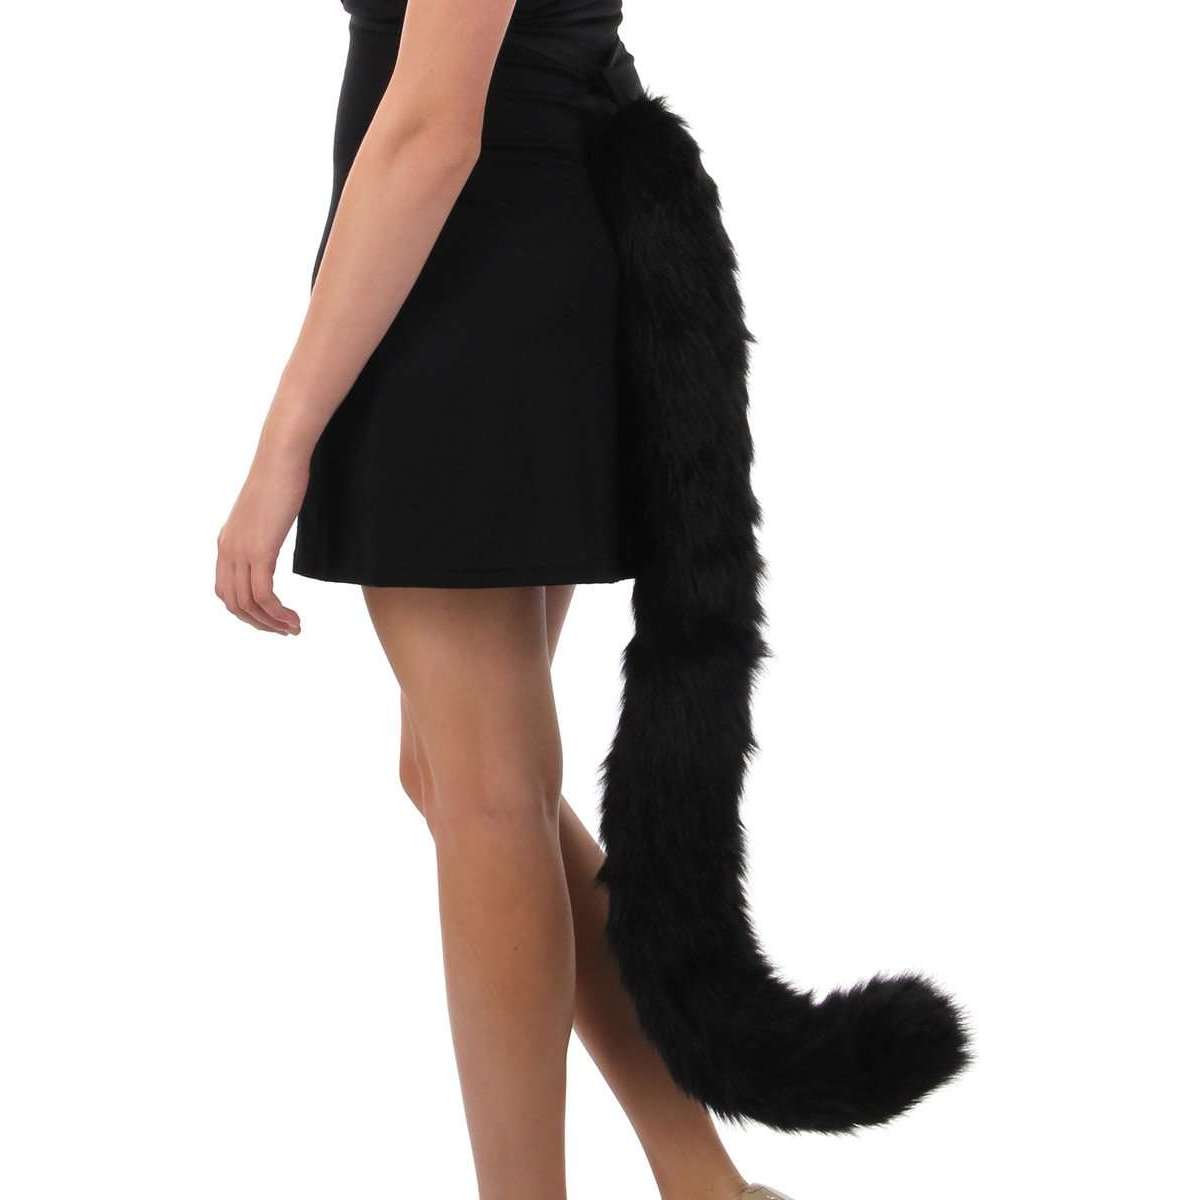 Deluxe Oversized Black Kitty Tail